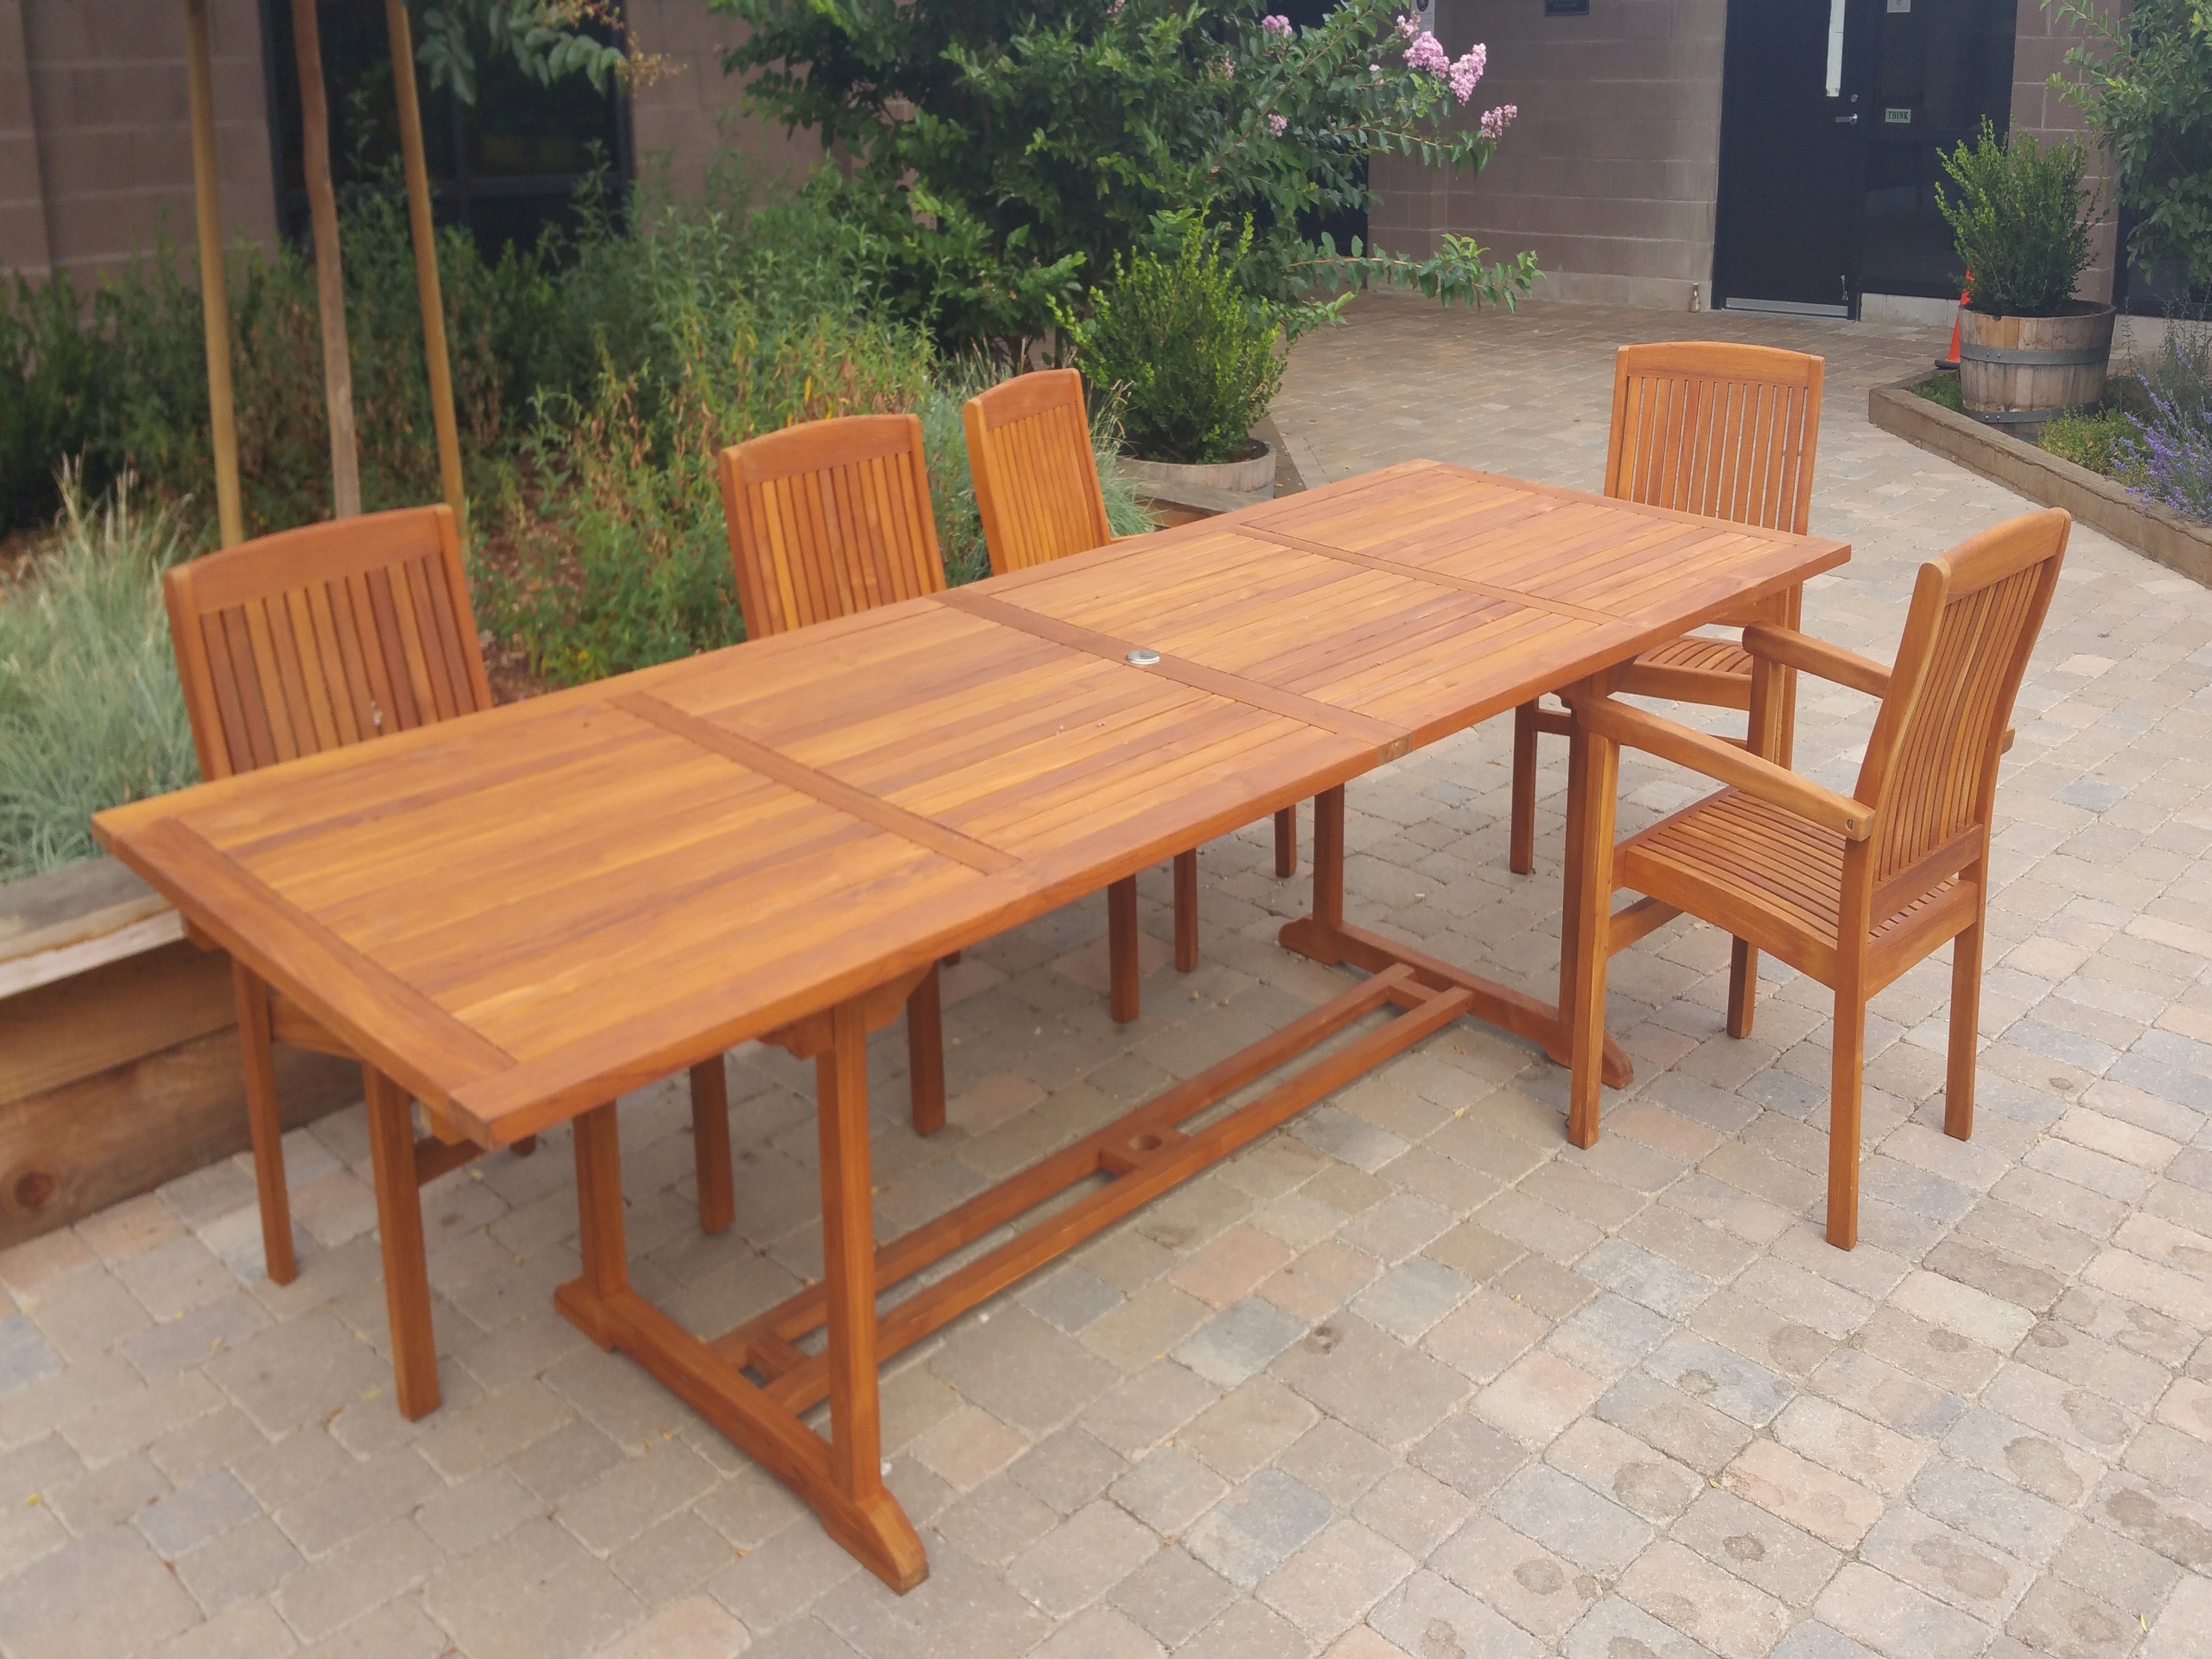 Dining Room Chairs To Match Teak Table